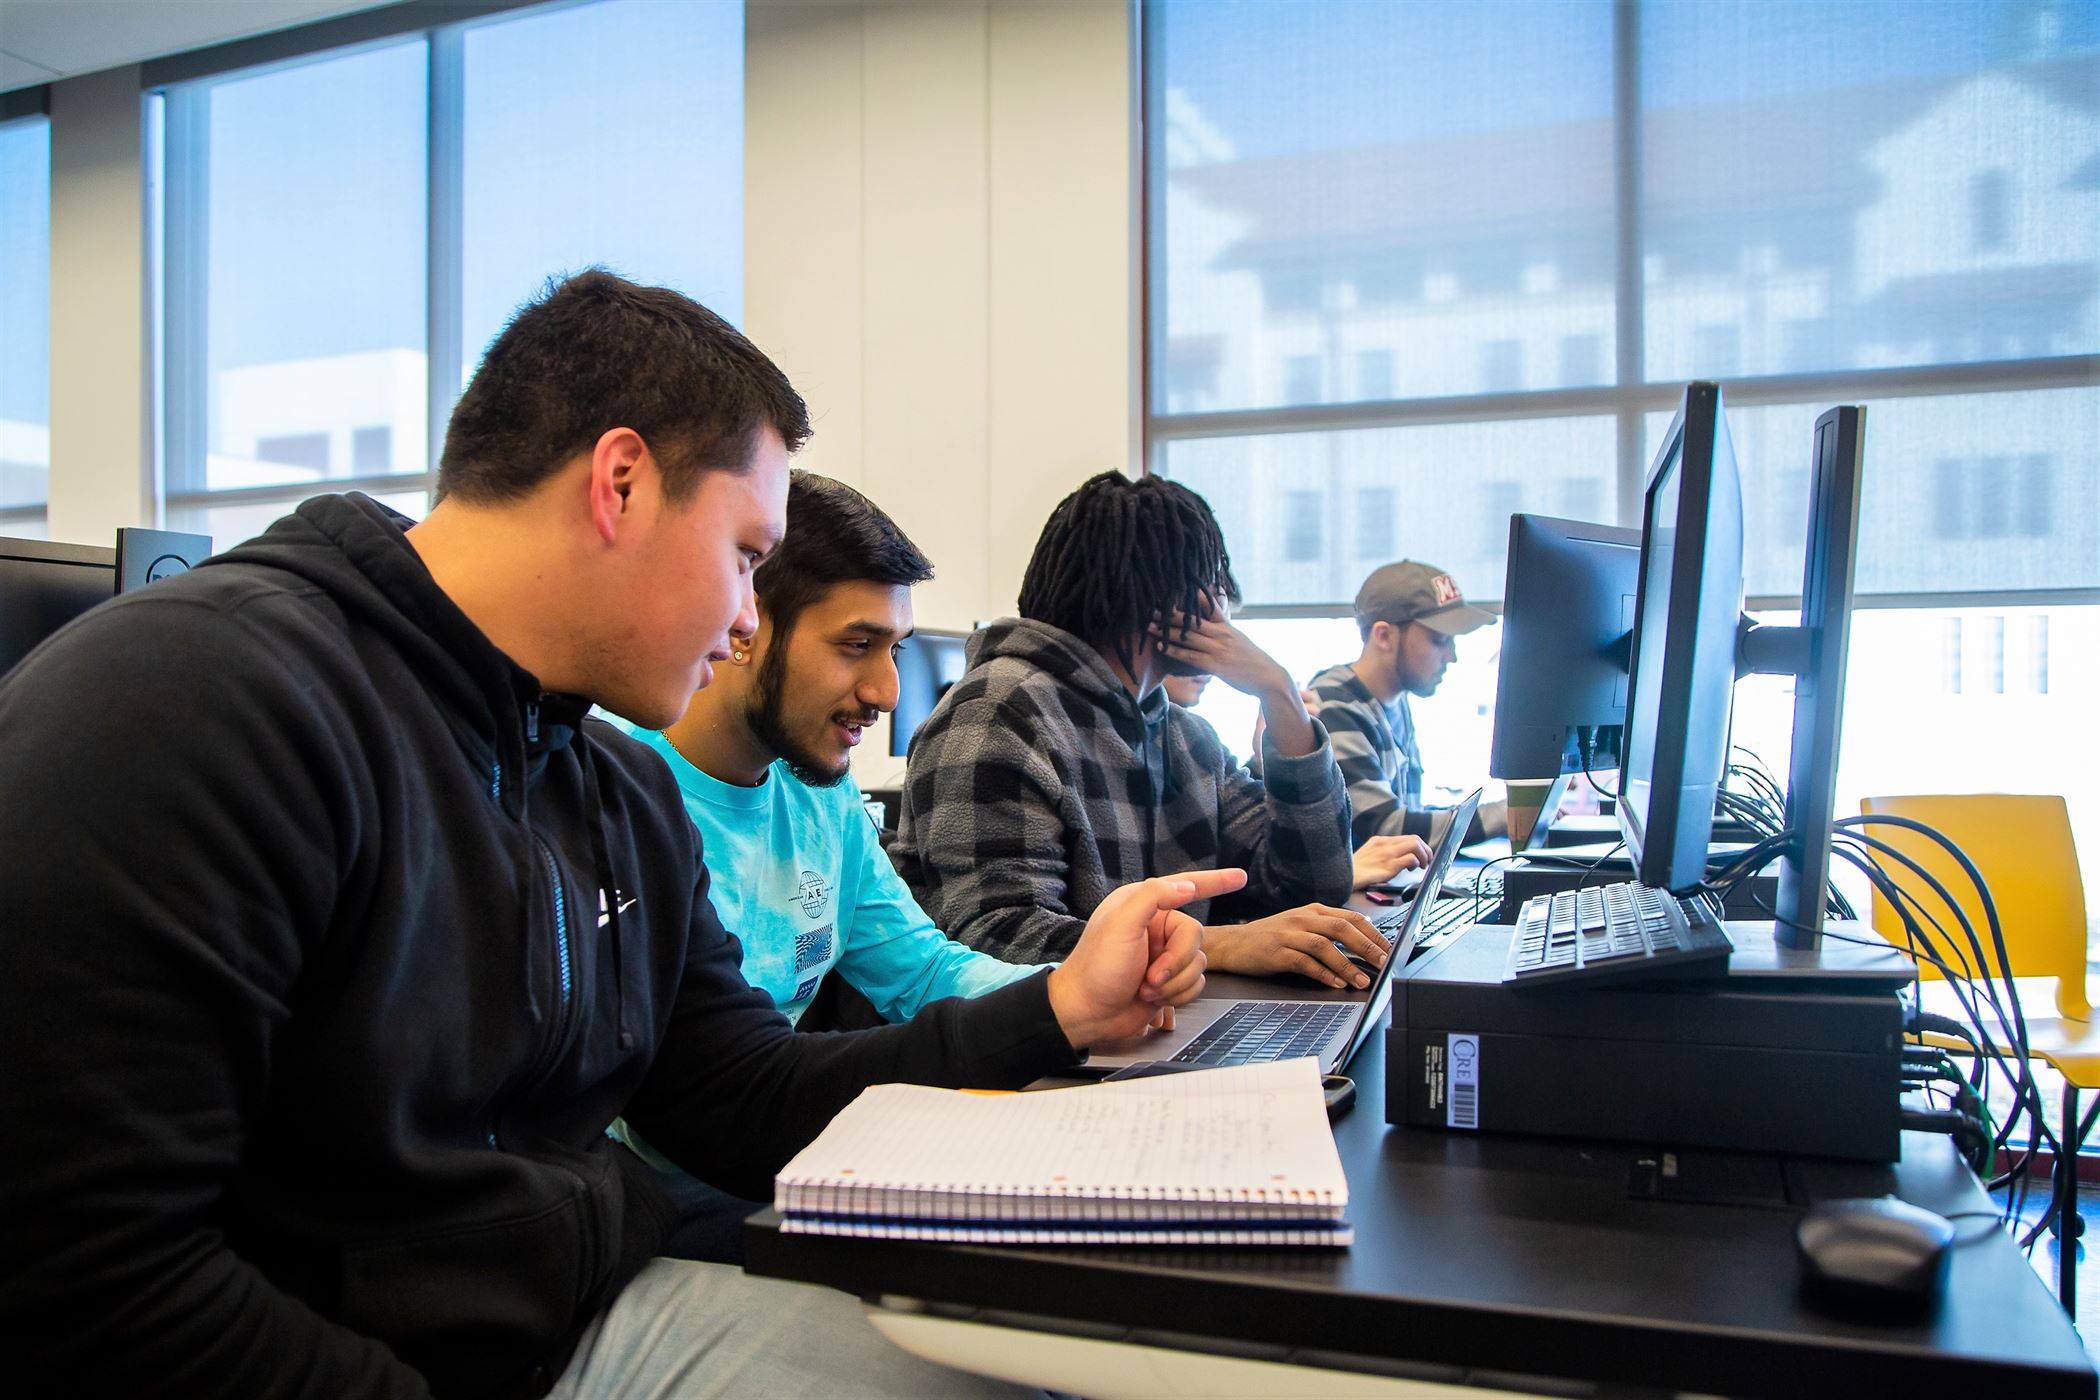 Students work together on an assignment. Chris Krusberg | The Montclarion